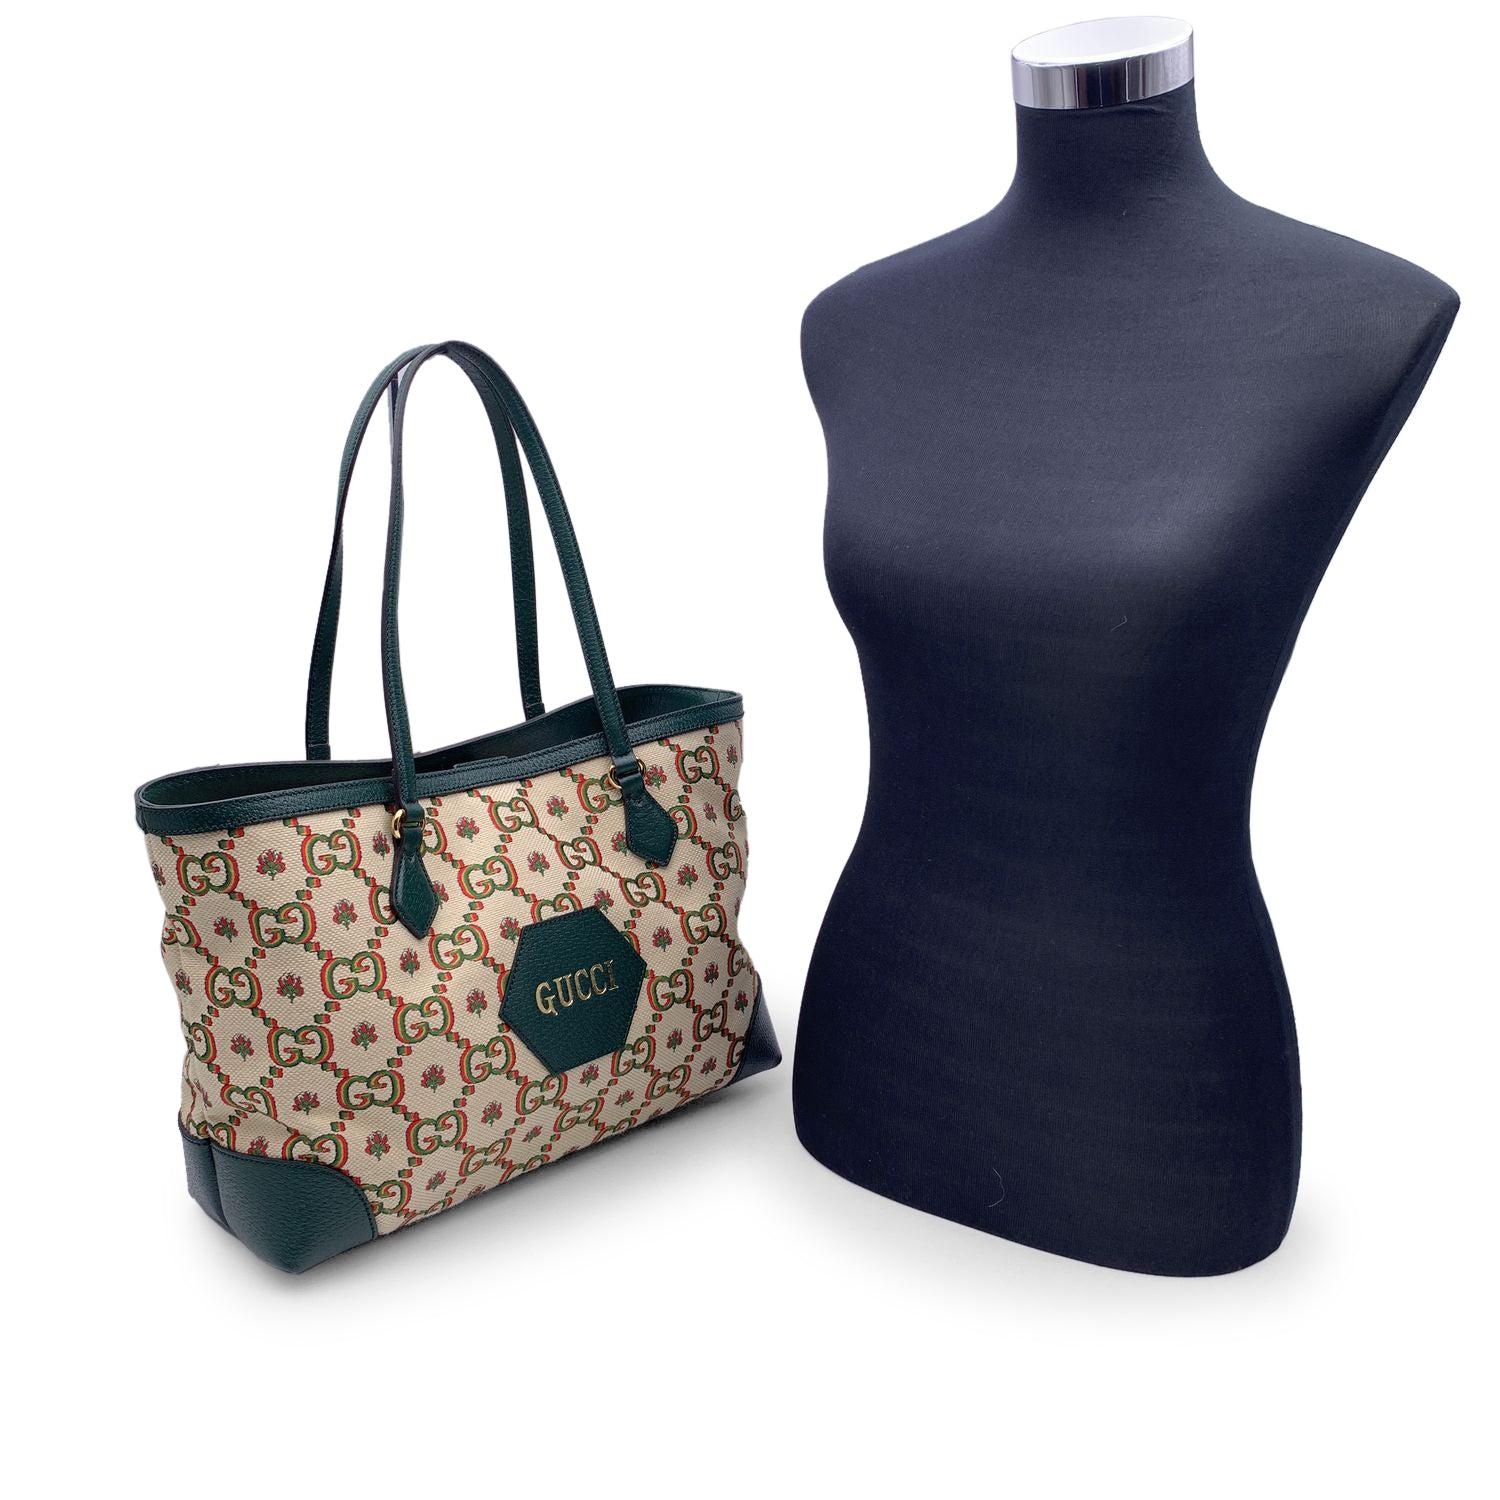 Gucci 100 Ophidia tote bag designed In honor of the Centennial of the brand, from the The Gucci Aria collection. Crafted in beige jacquard canvas with green leather trim and shoulder straps. Gold metal hardware. Leather detail on the front with